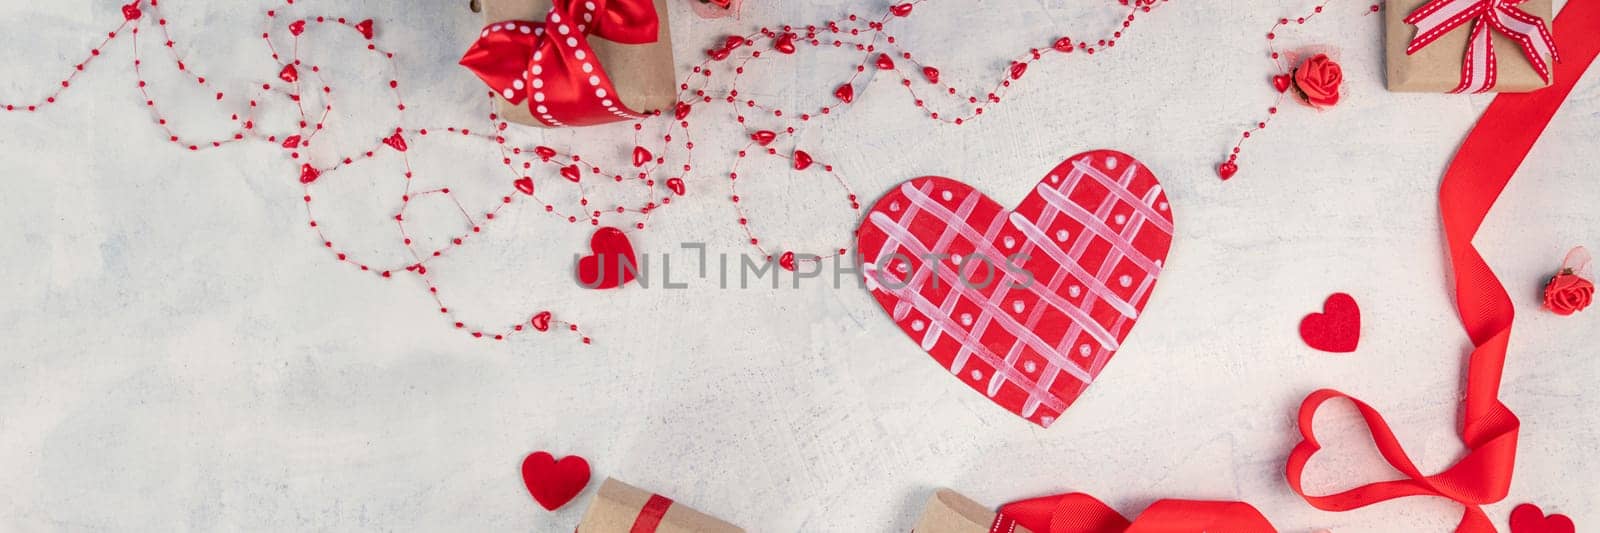 banner of heart from a red ribbon, gifts with a red ribbon and red hearts on a white stone background. Valentine's day background. Valentine's day concept. Flat lay. Top view